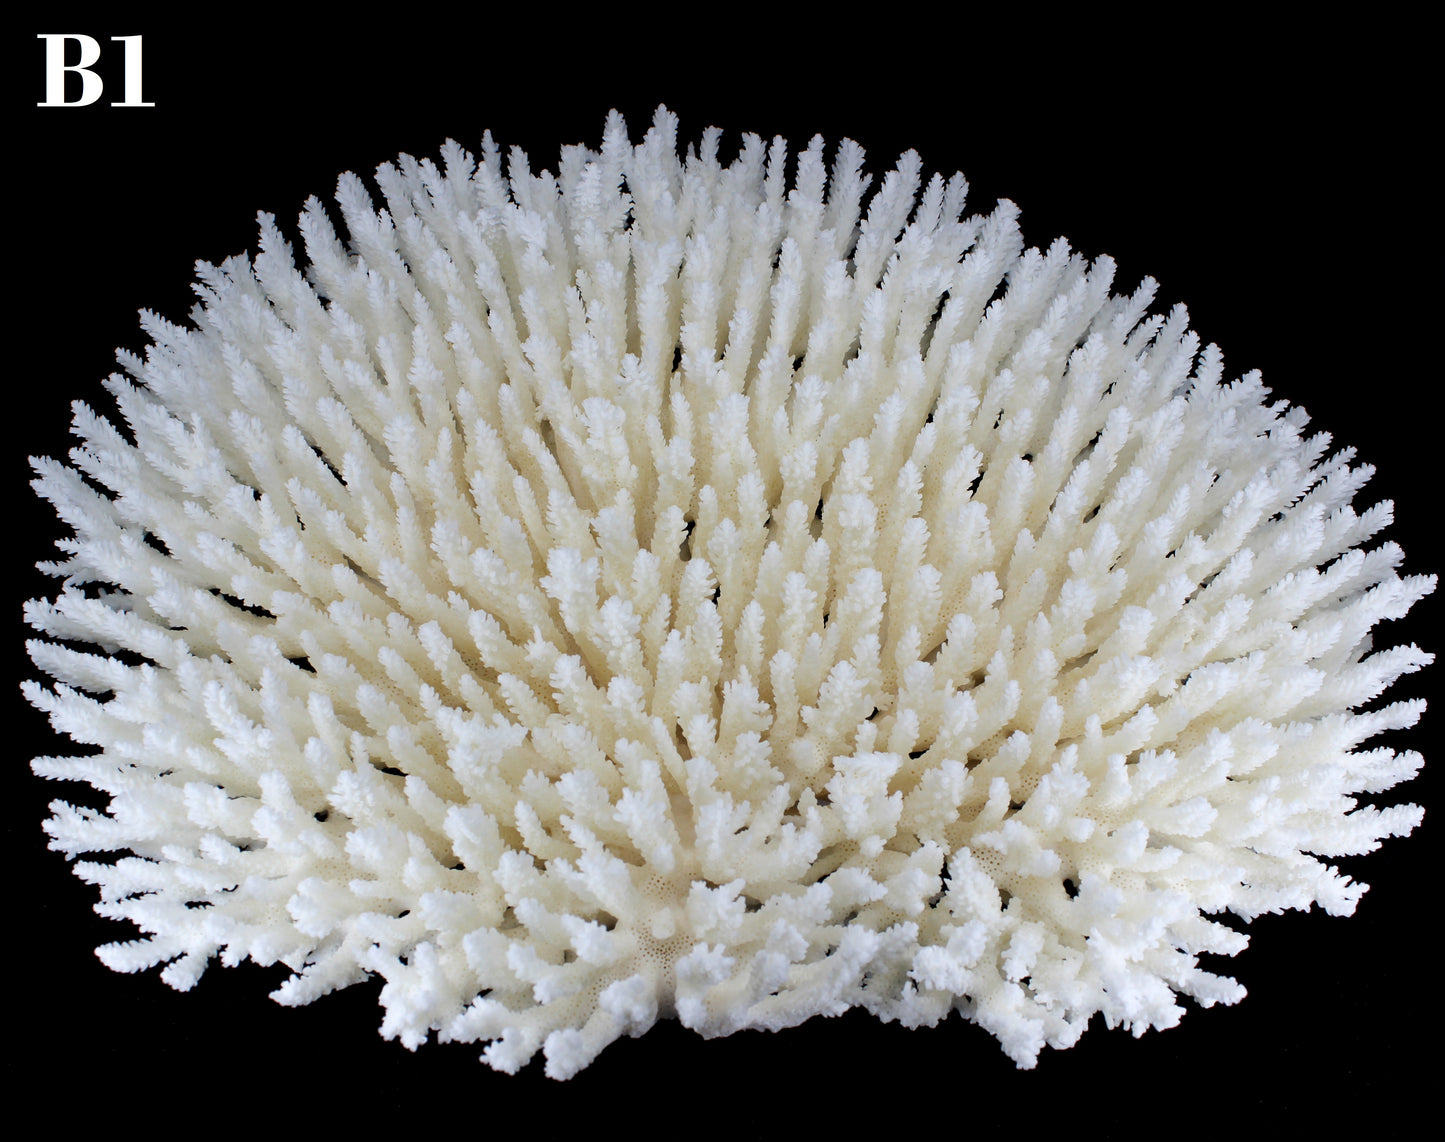 Table Coral 15-18"